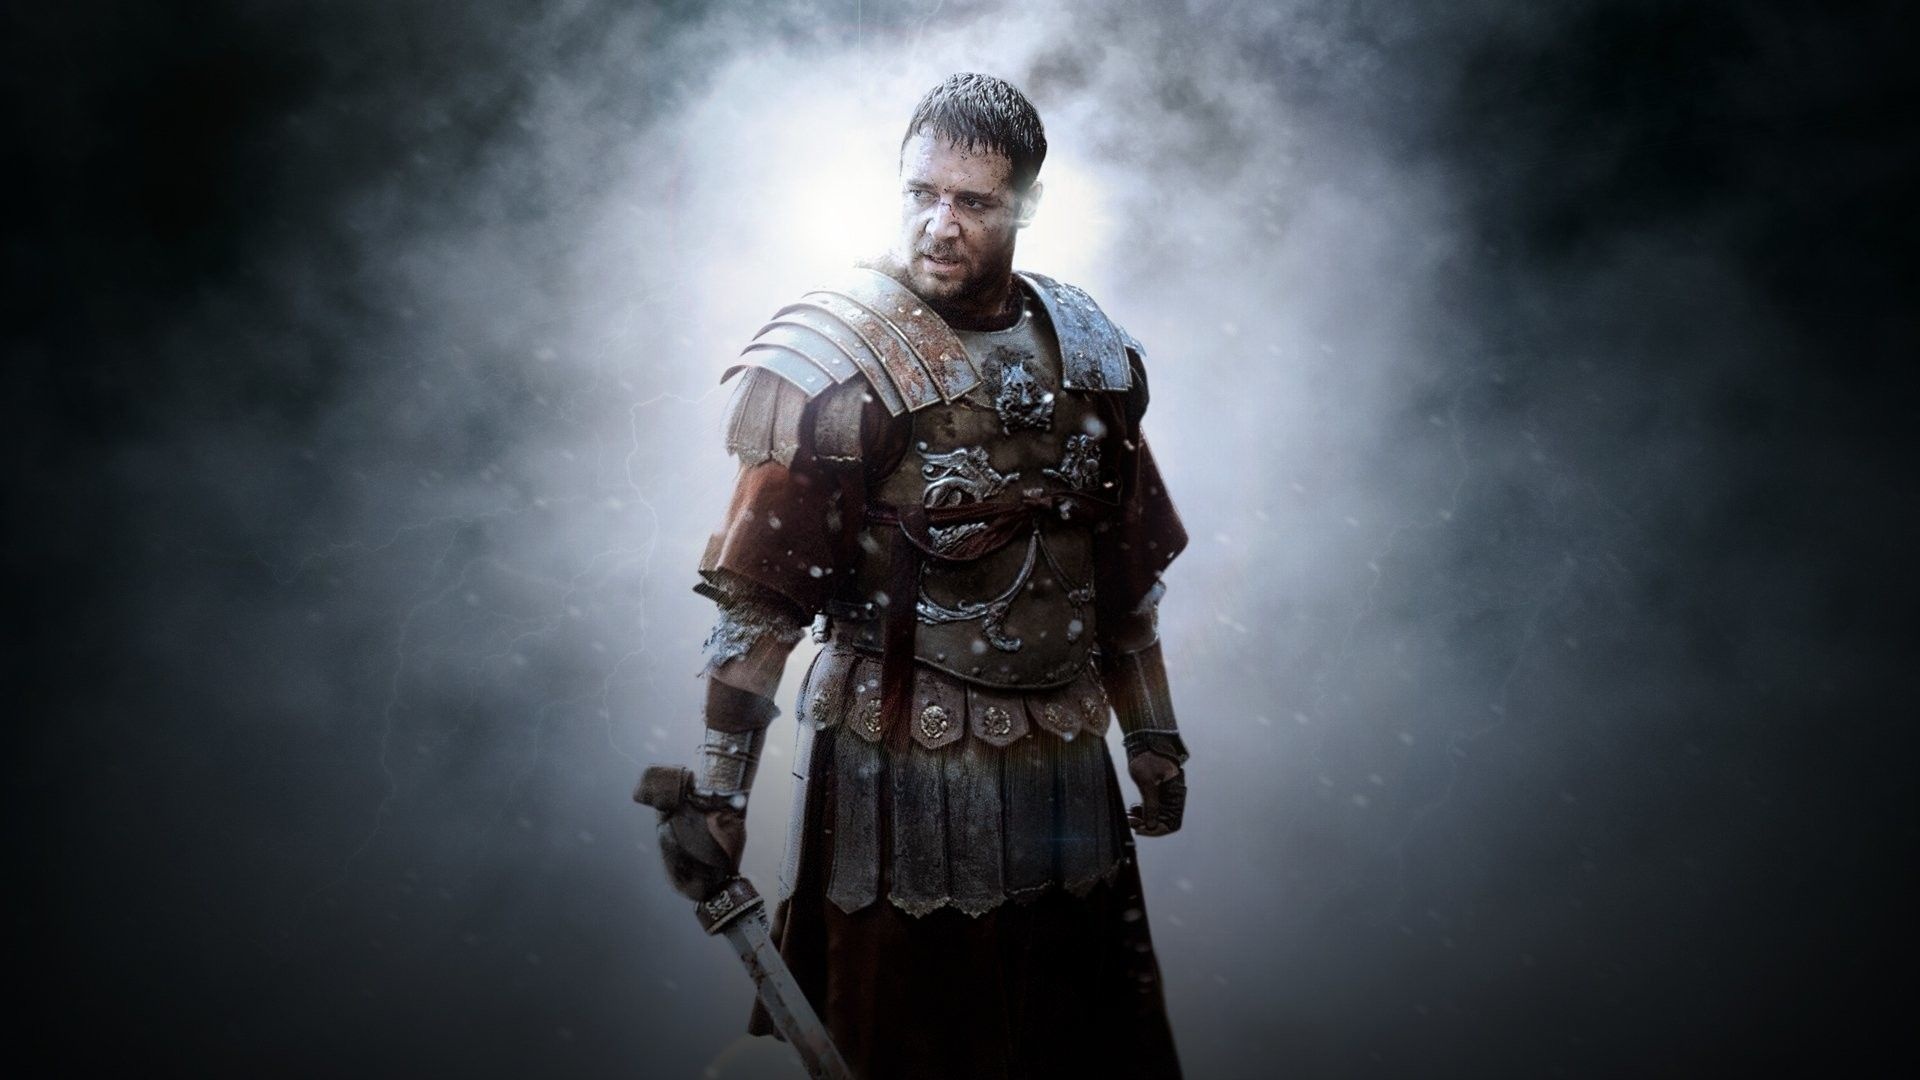 Gladiator epic, Ancient Rome, Arena battles, Russell Crowe triumph, 1920x1080 Full HD Desktop